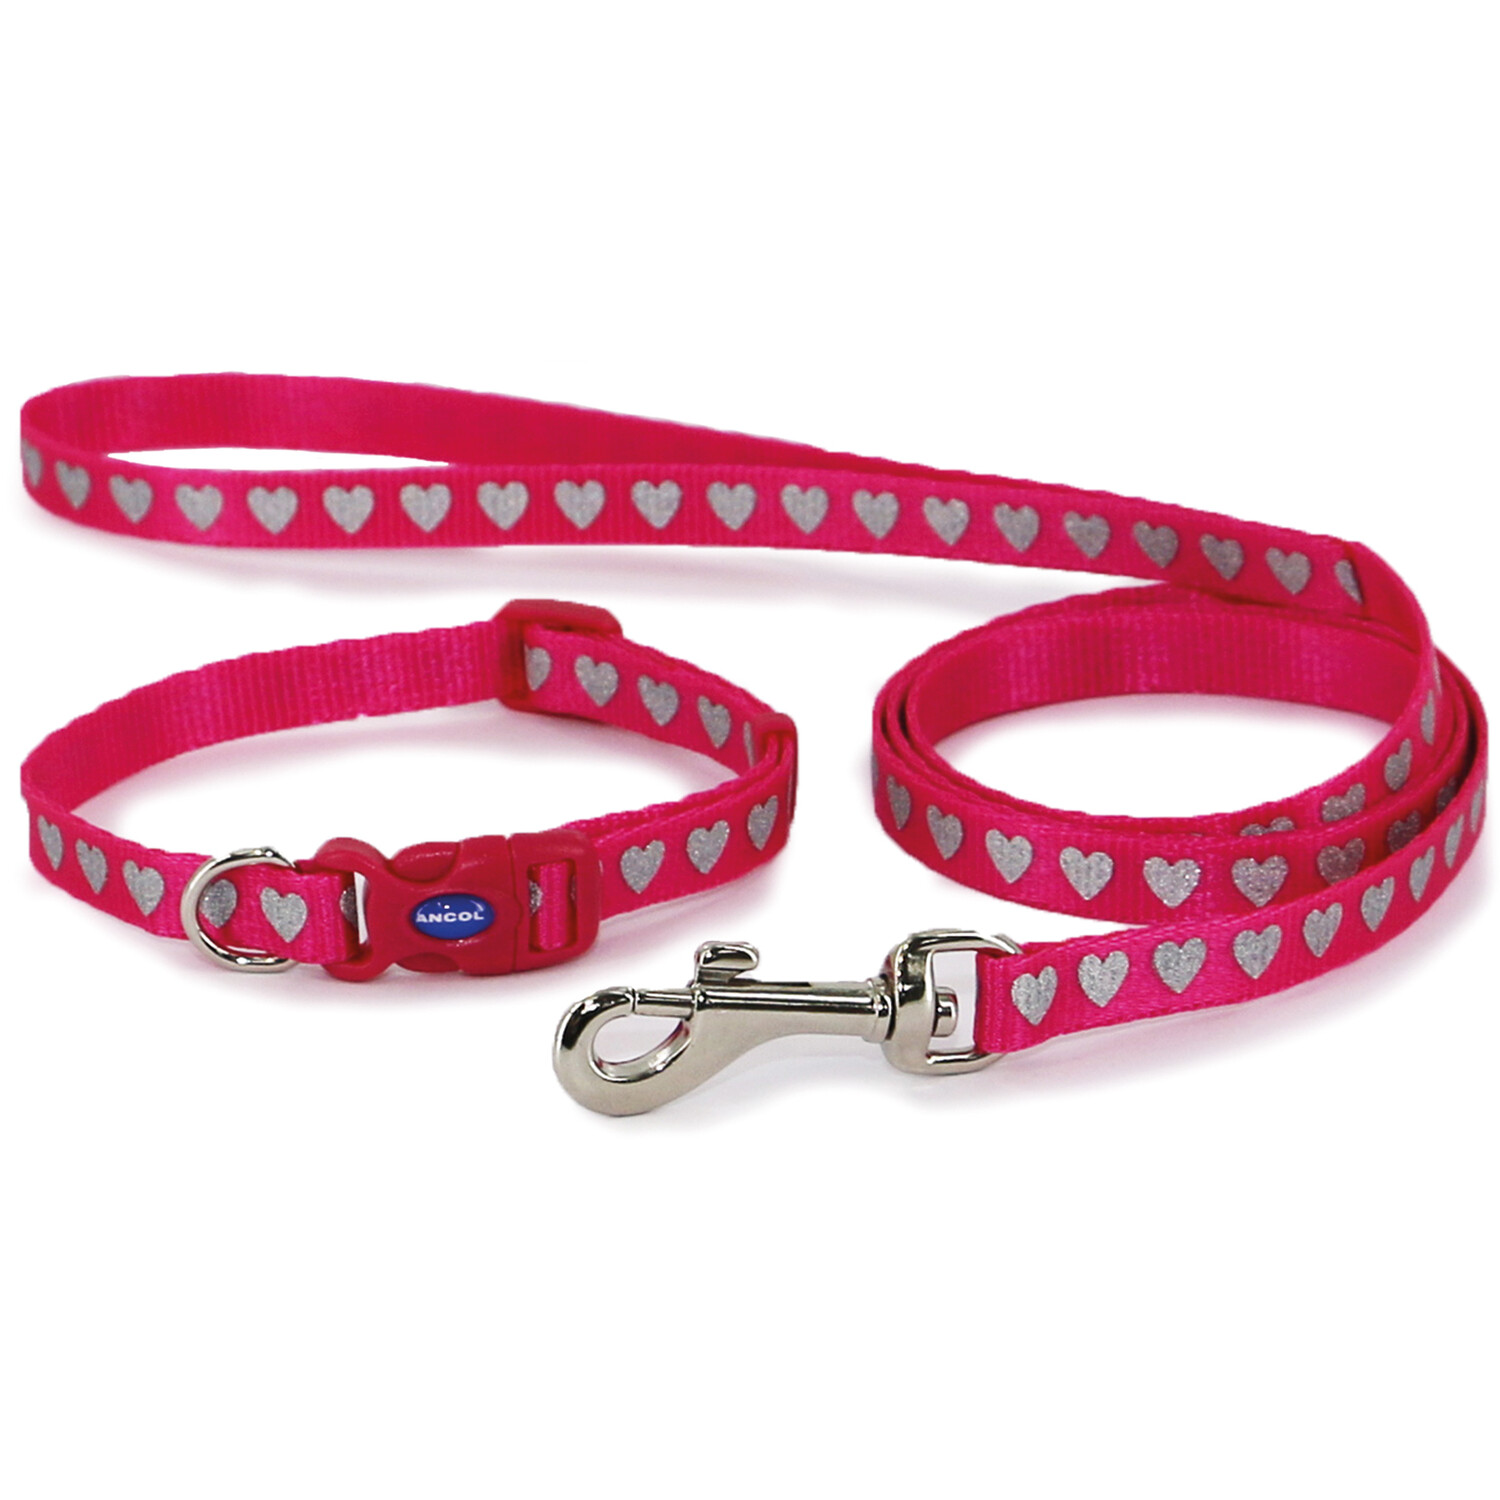 Small Bite Reflective Collar and Lead Set  - Pink Image